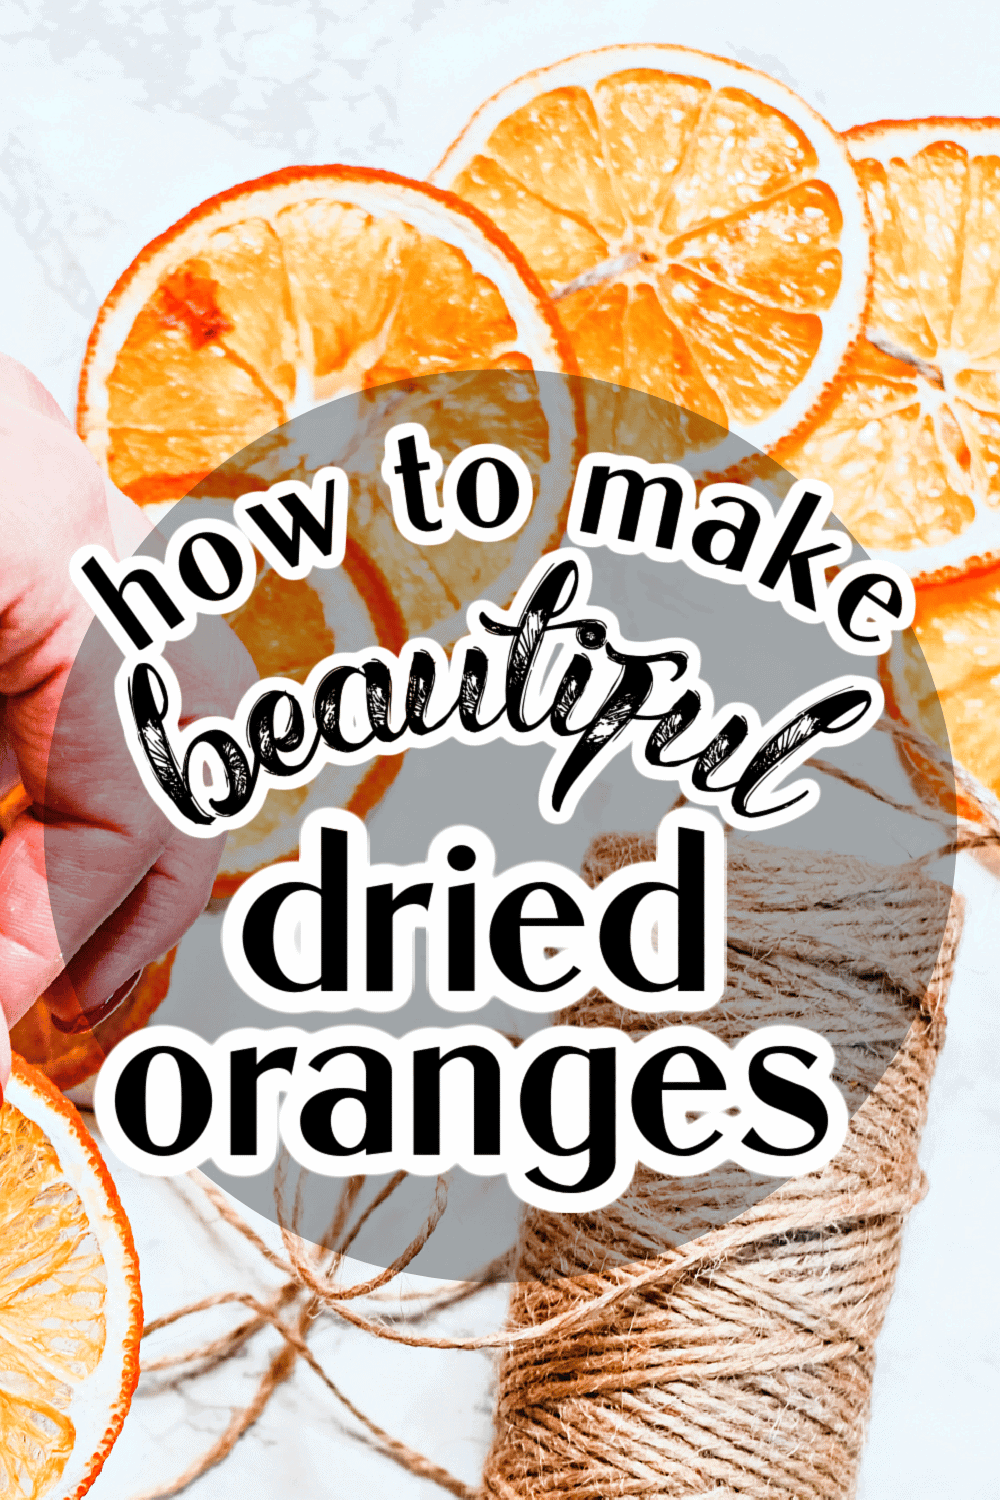 How to make orange slices dried - dried oranges with twine with text over it